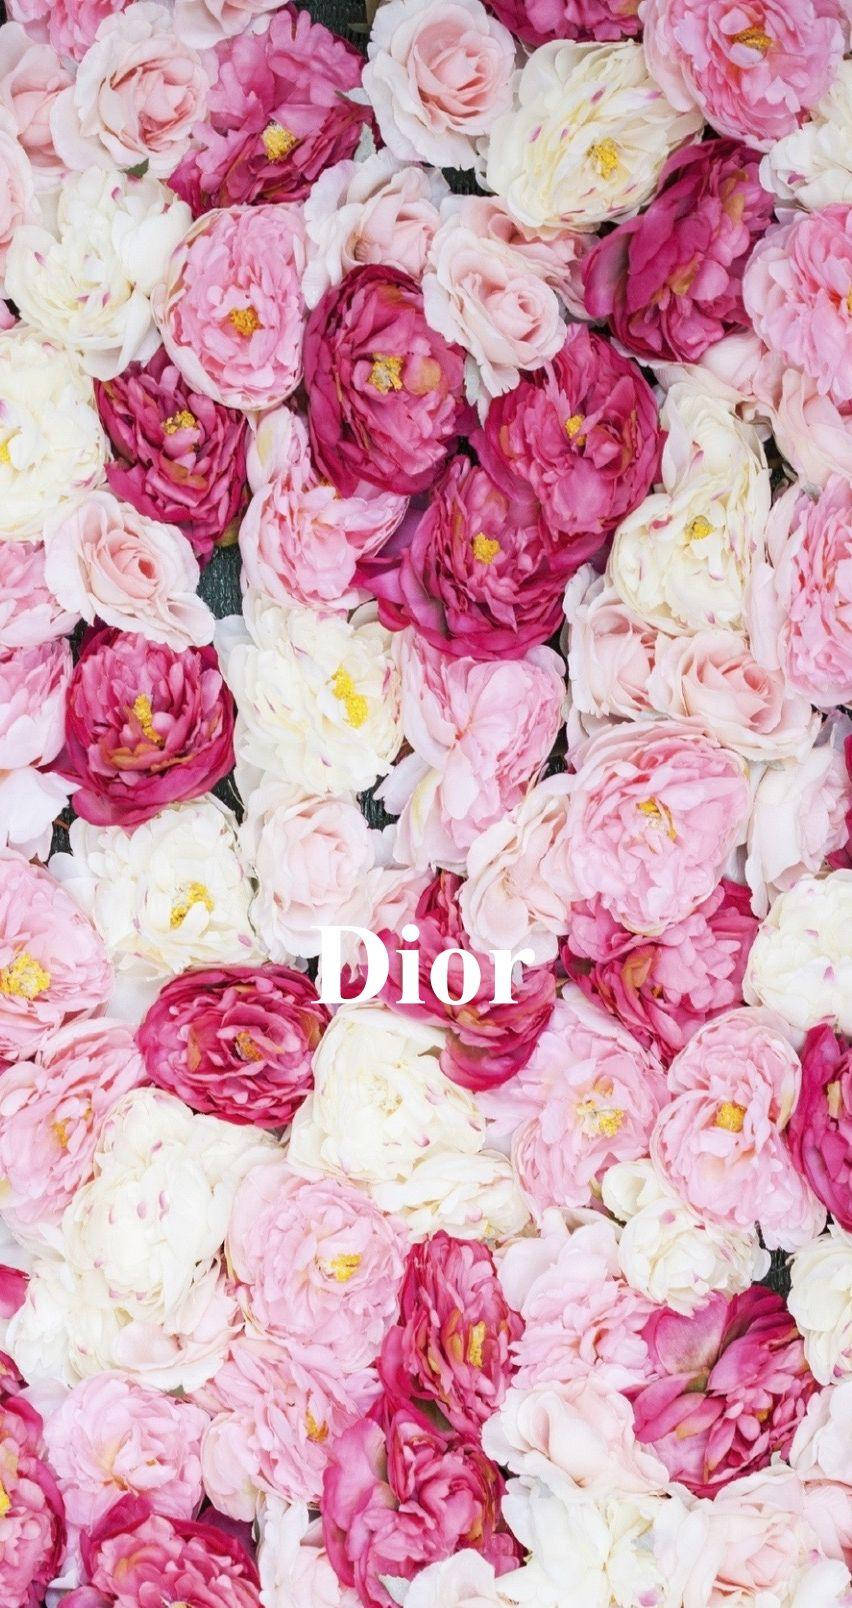 Dior Floral Wall Background